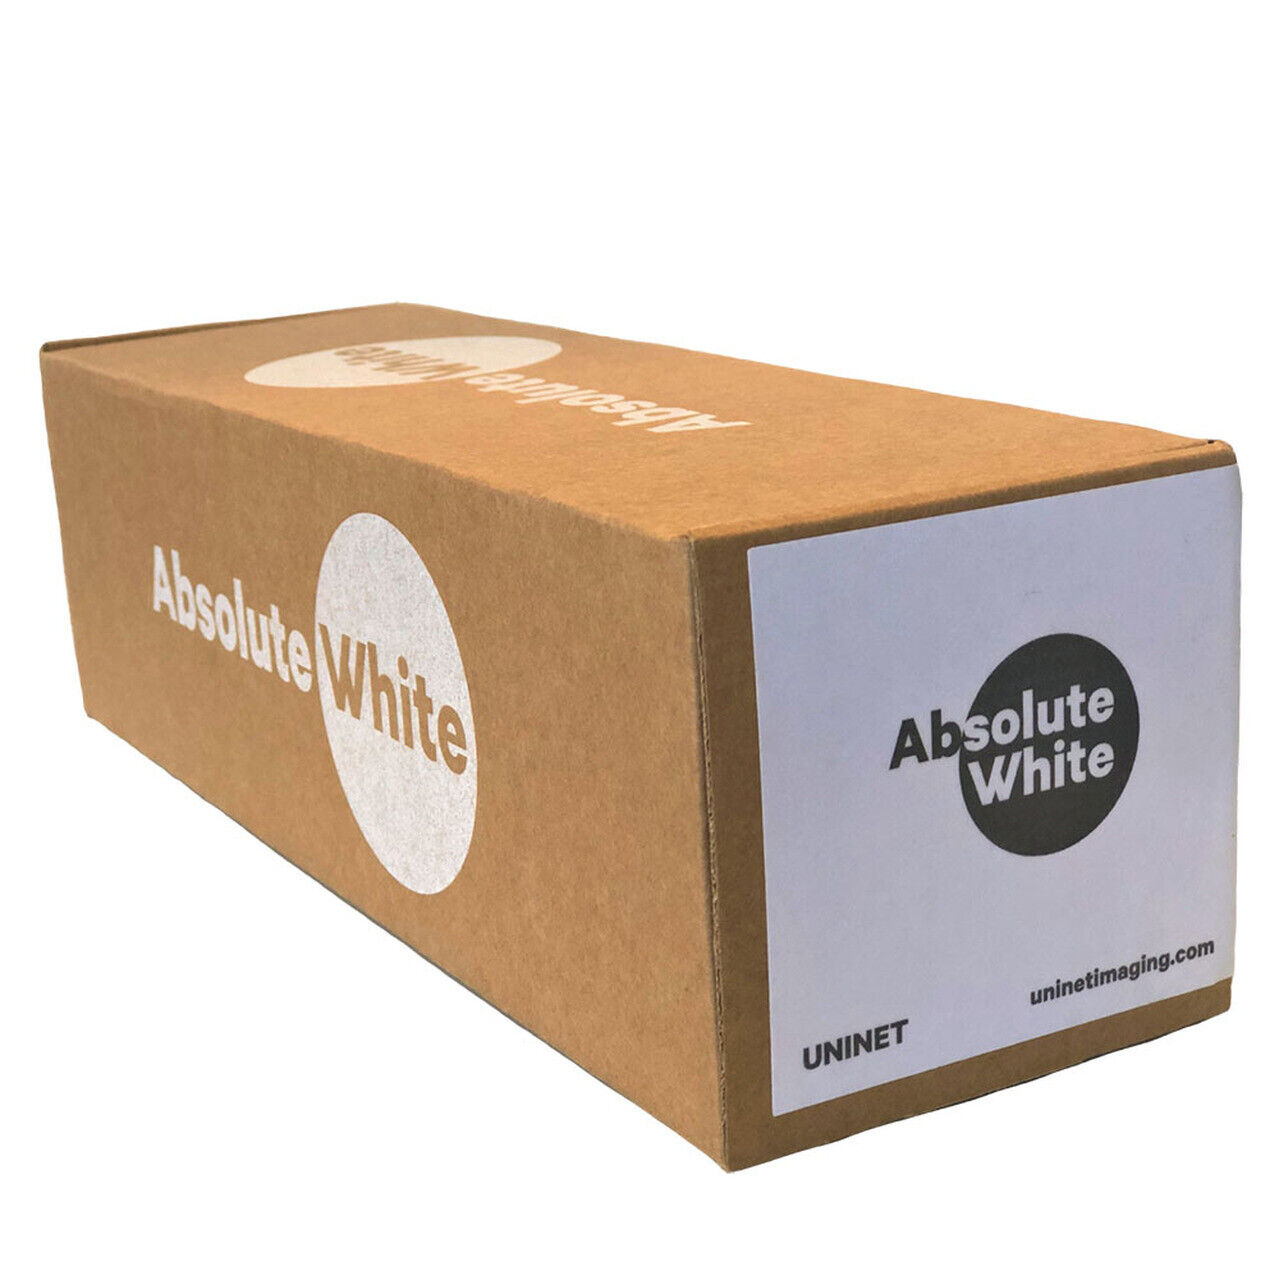 Absolute WHITE Toner Cartridge for HP Color LaserJet PRO M452 (2,300 Pages)